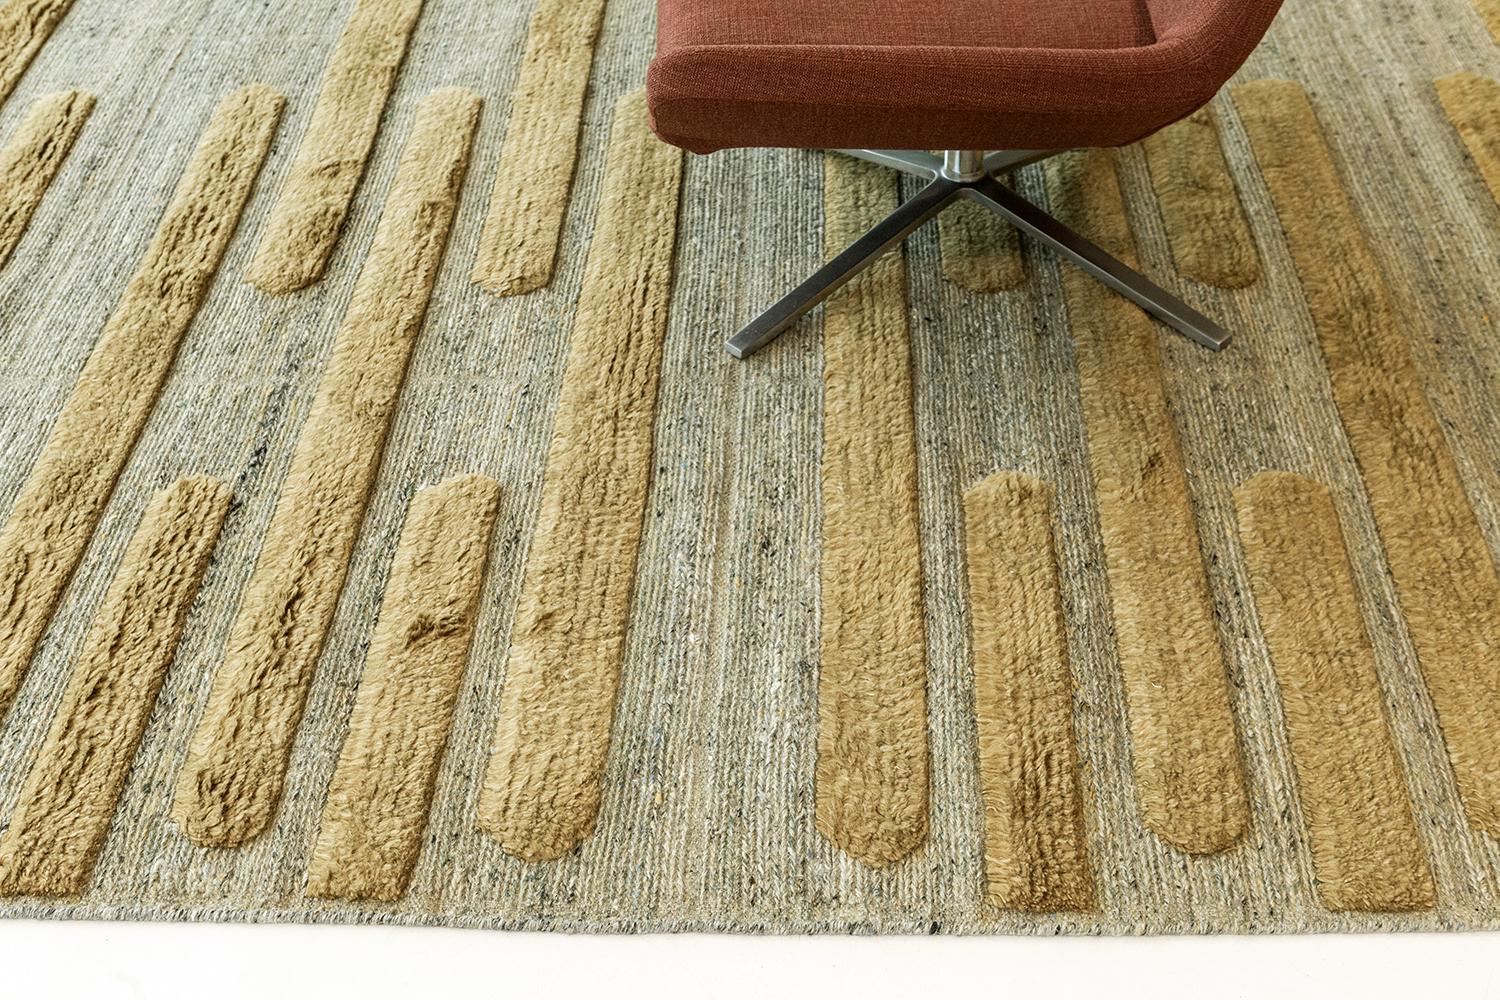 In Izu, flatweave and pile are joined in a tactile and syncopated composition of horizontal green-gold shapes on mossy gray flatweave. Izu is a rug for the senses. Refined design is matched with vivid tonal palettes in the Michael Berman Collection.